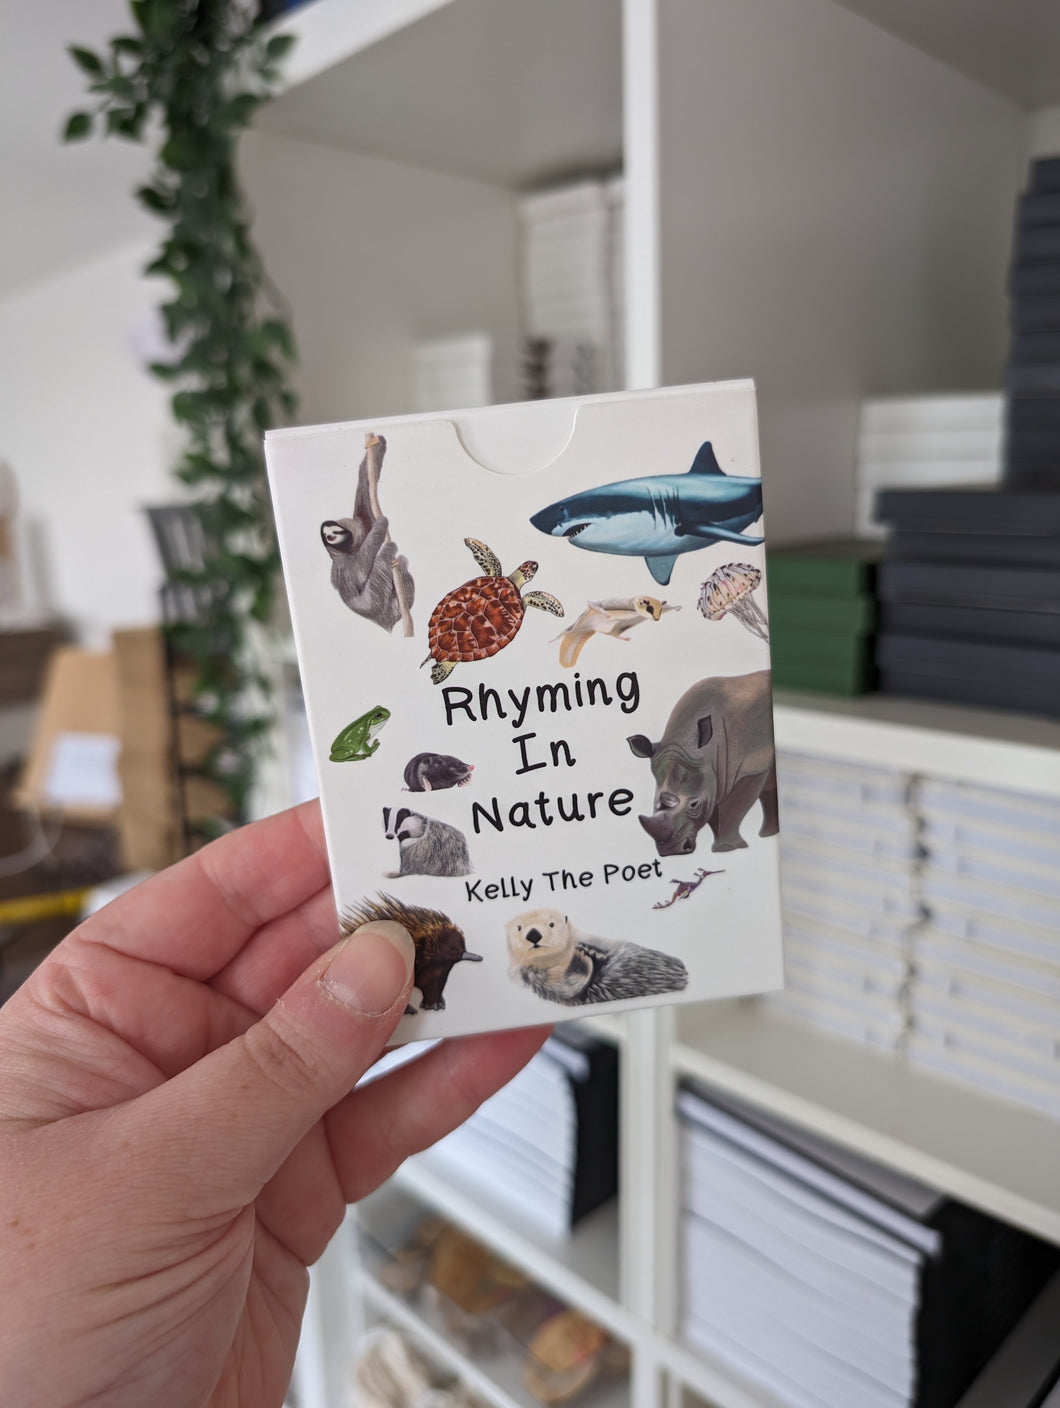 Old Design of Rhyming In Nature